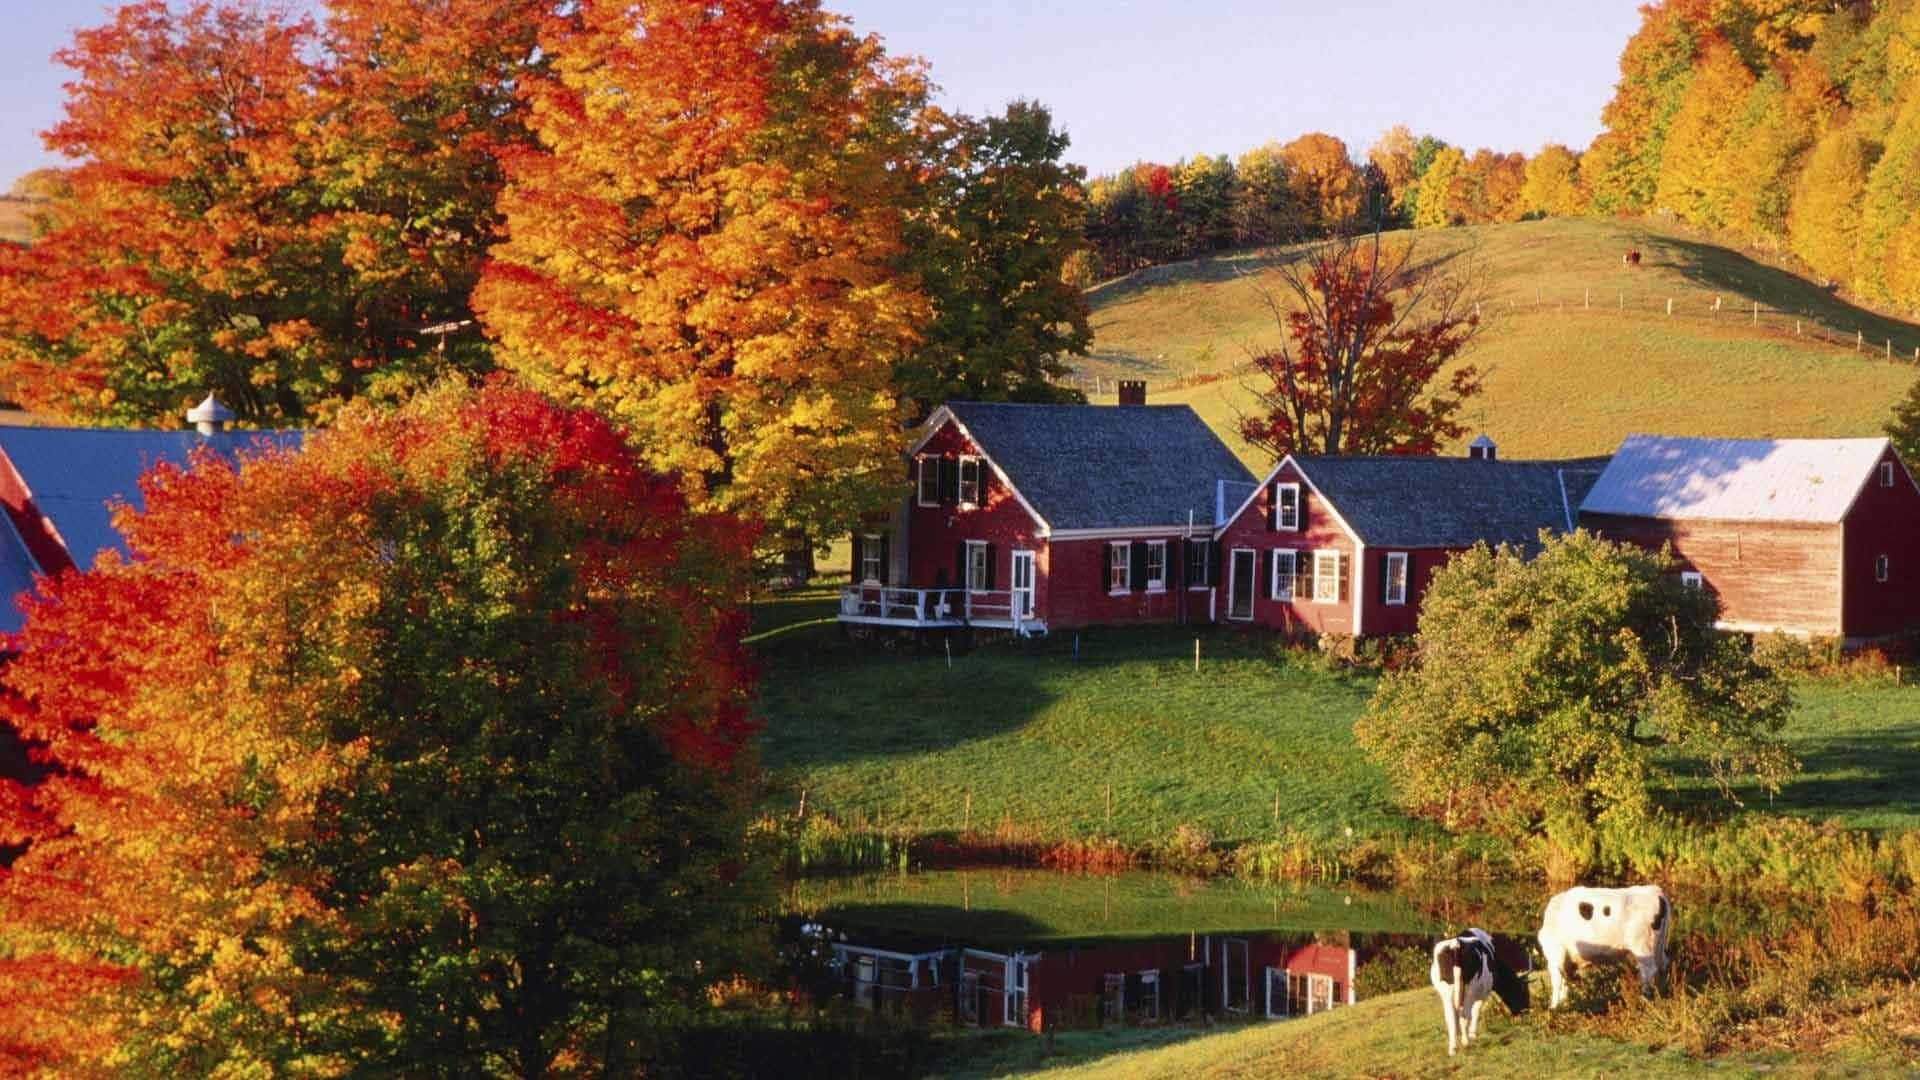 A Farm With Cows And Trees In The Fall Background